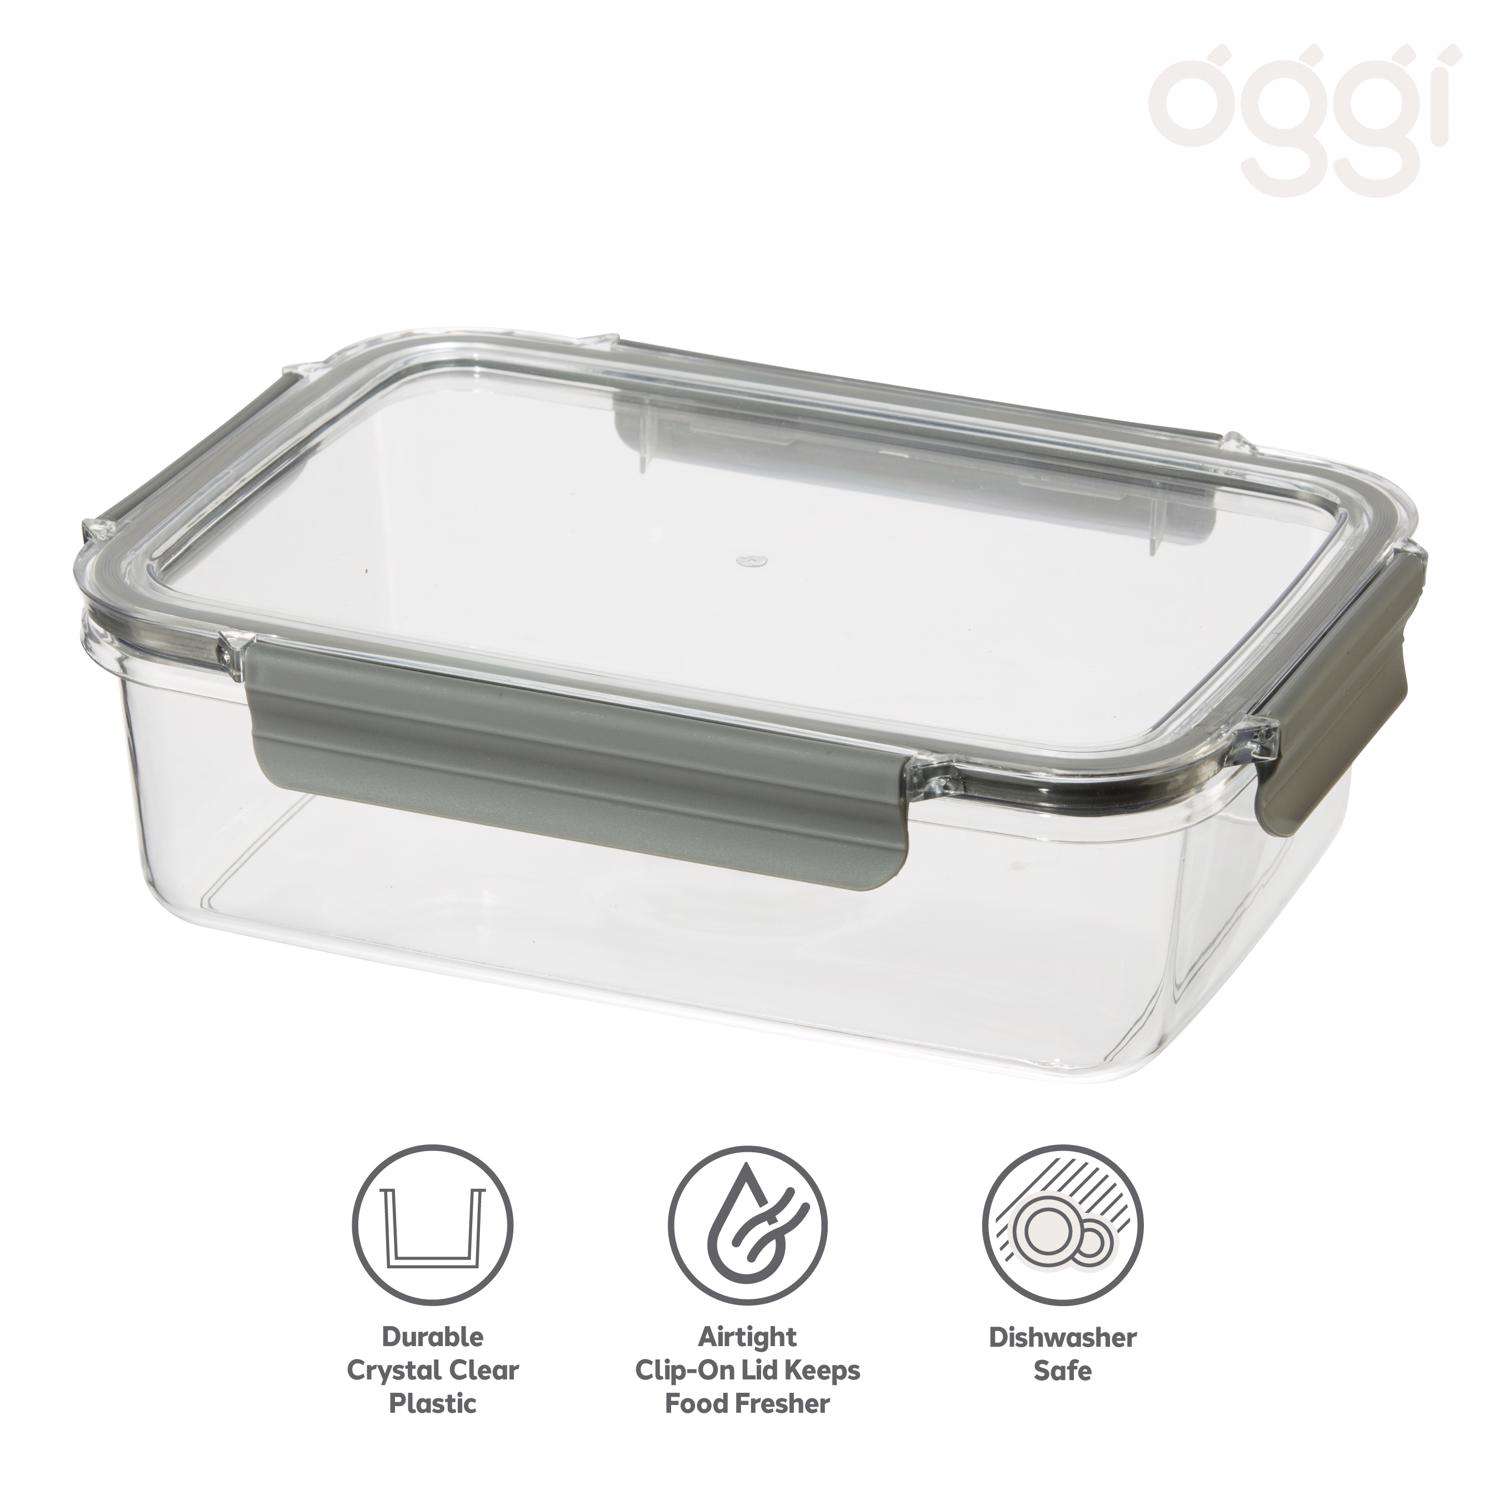 NEW! OGGI Clear Plastic Canister Jar Metal Close Lock Lid Rubber Seal  Container